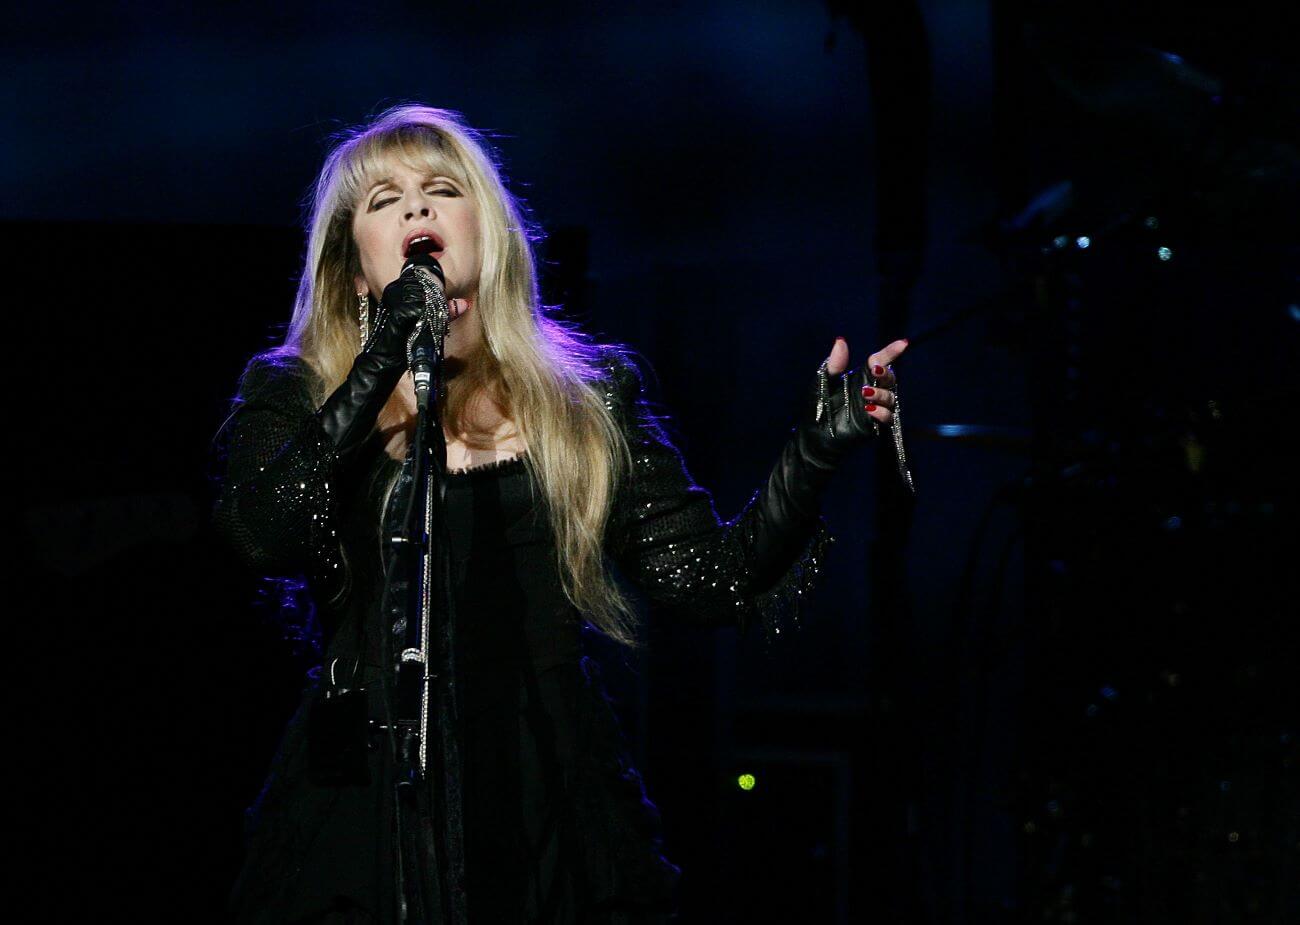 Stevie Nicks wears black and sings into a microphone.